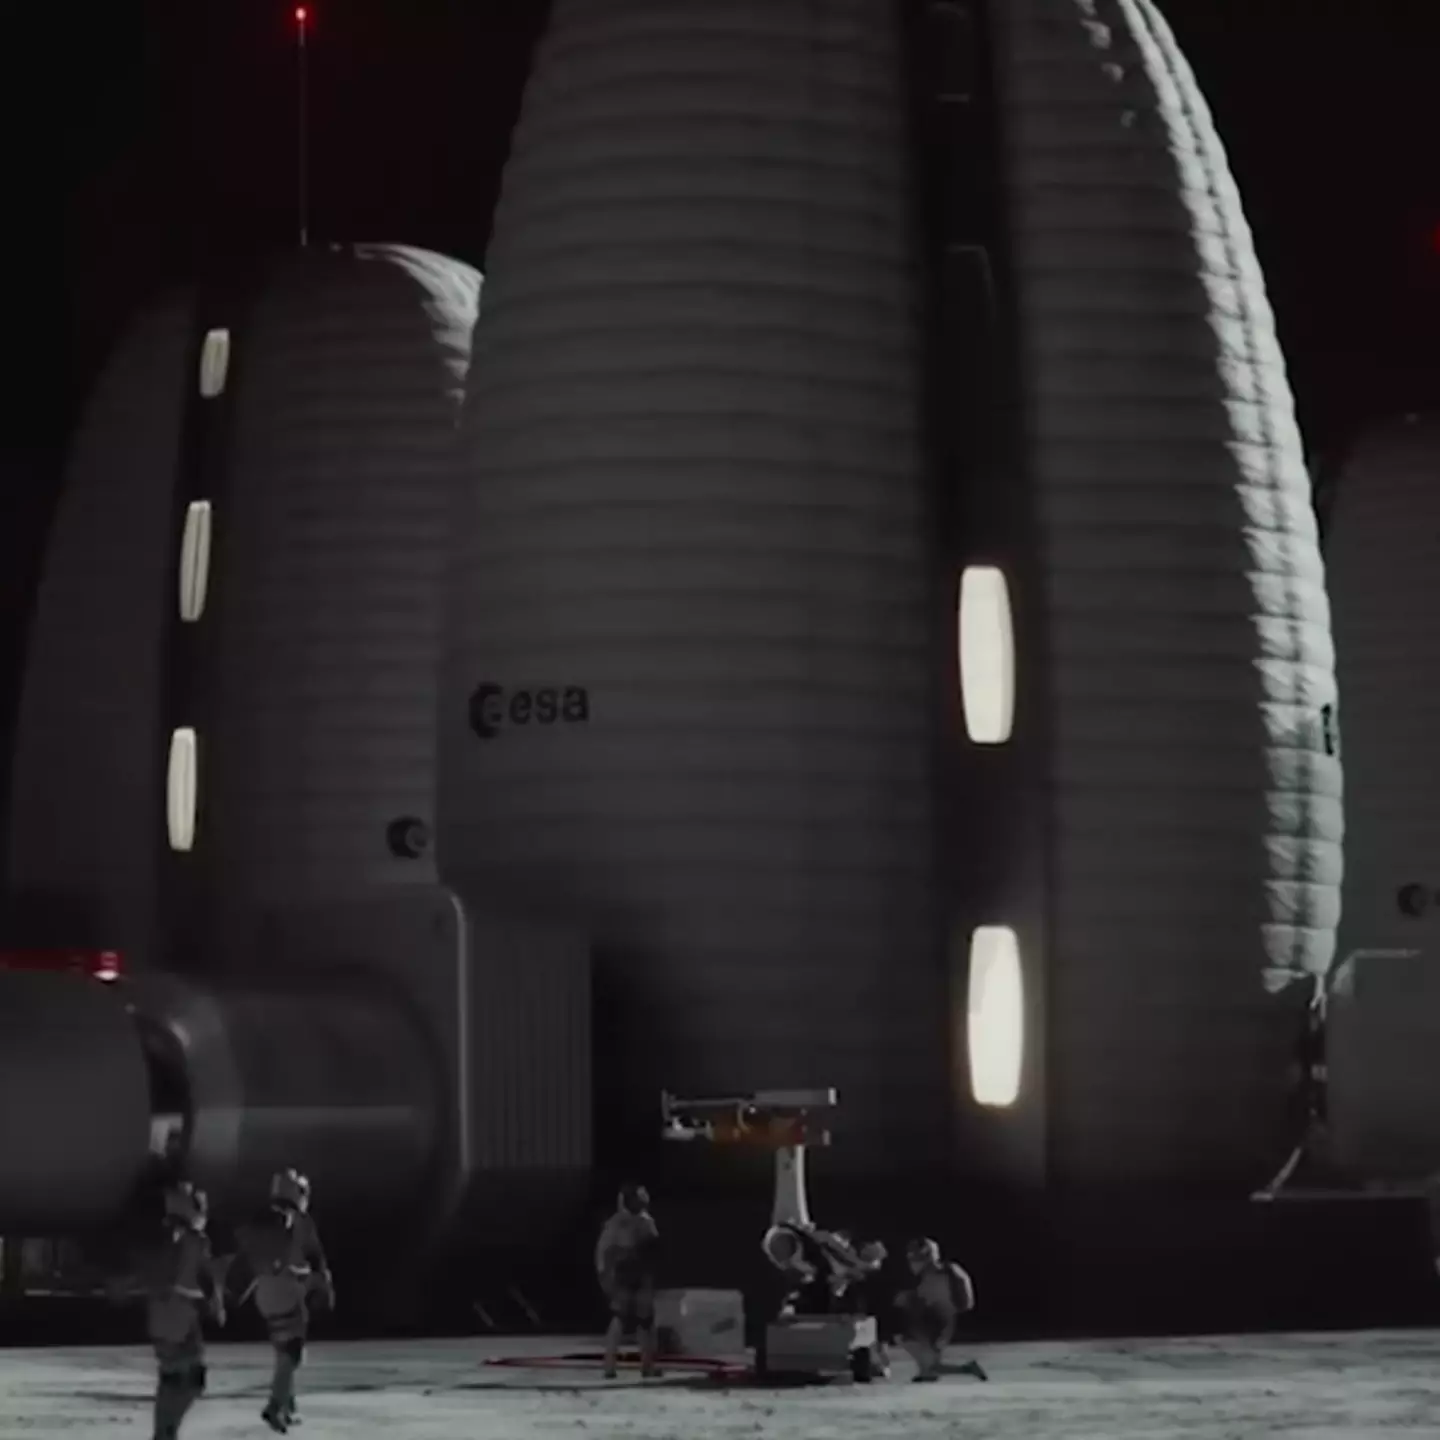 Crazy simulation shows what the Moon could look like with humans on it in 2075